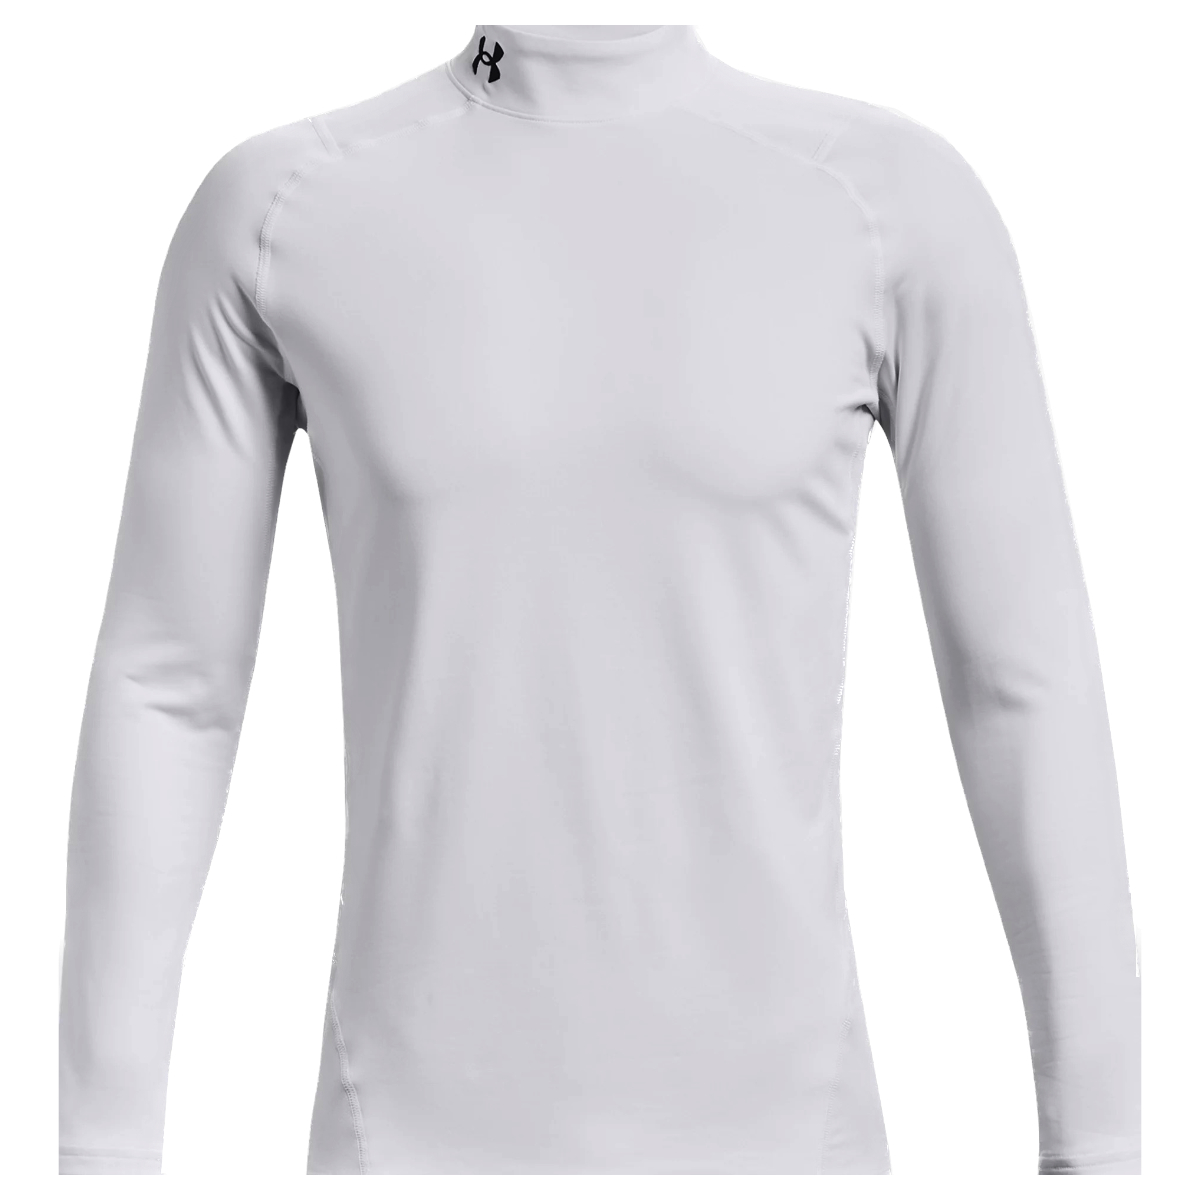 Under Armour Cold Gear Armour Fitted Mock White/Black